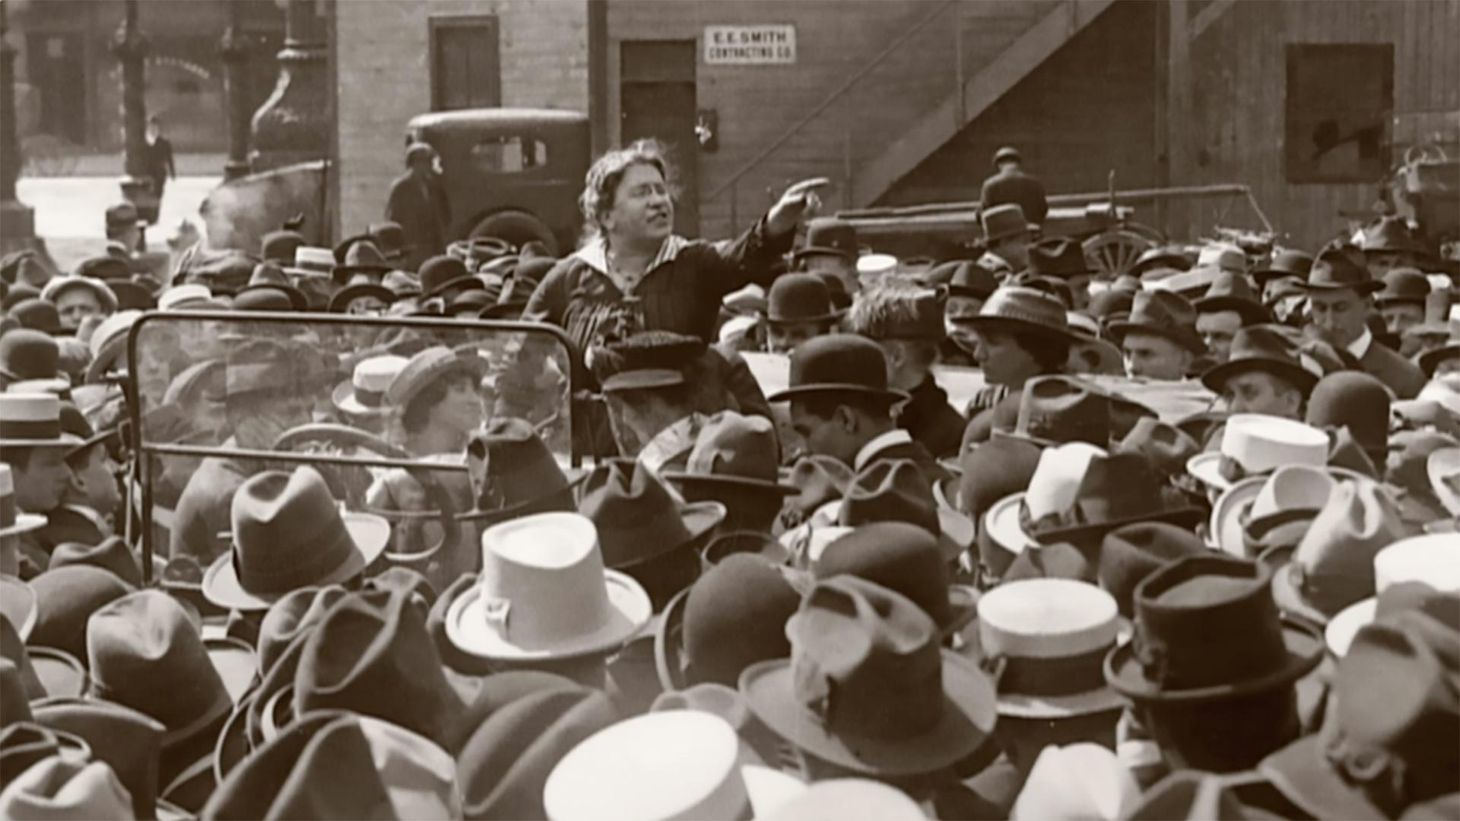 “The Function of Militarism is to Kill”: Emma Goldman and Questioning the First World War